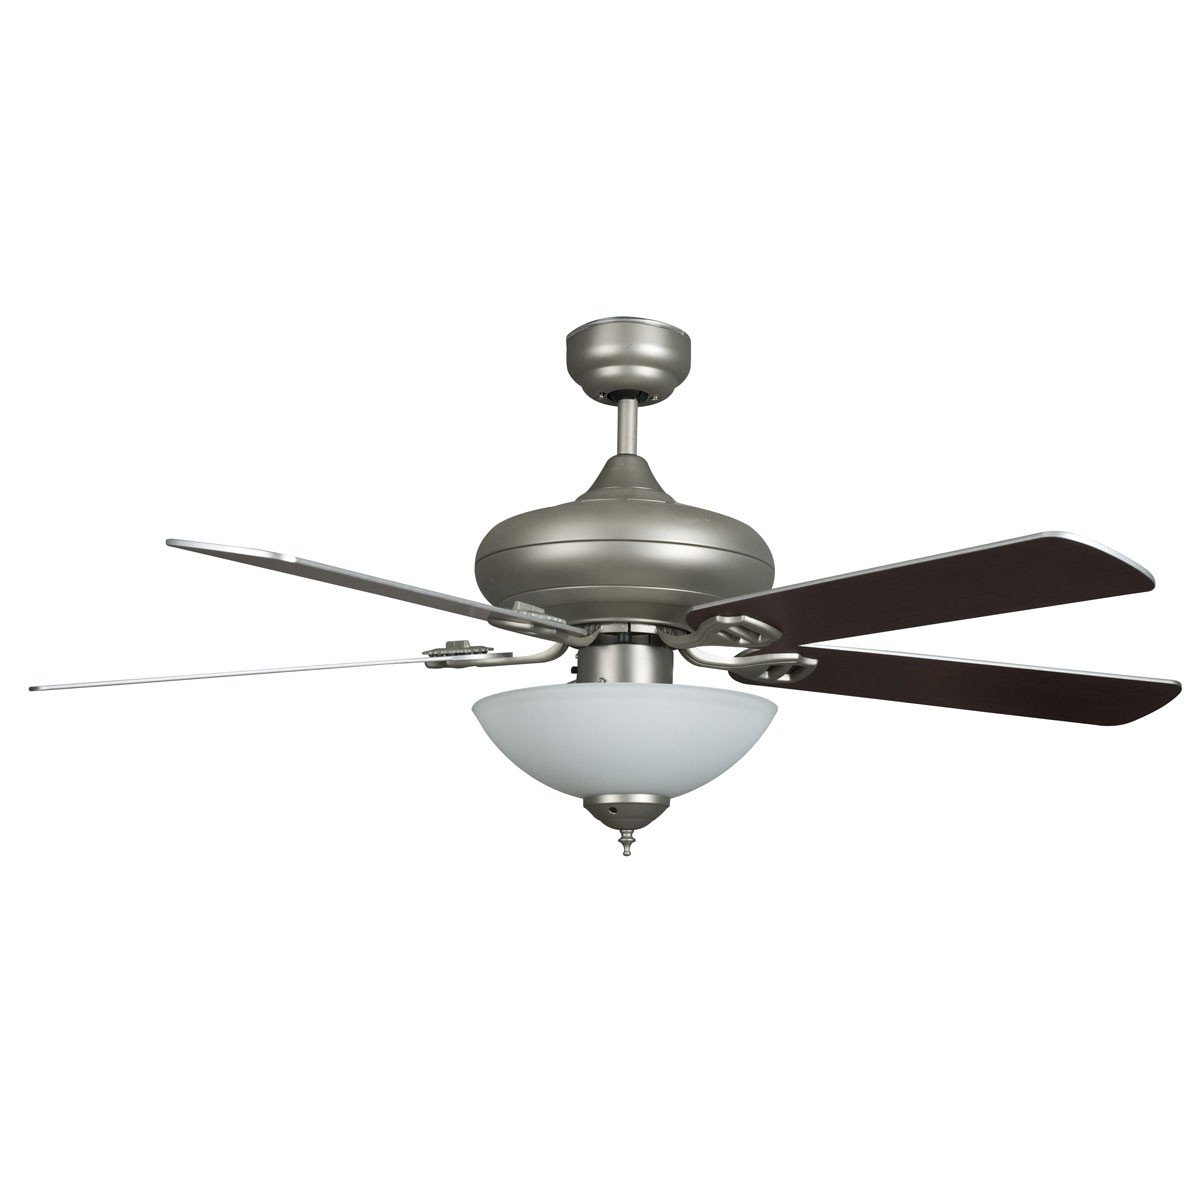 Concord Fans 52" Valore Modern Satin Nickel Quick Connect Ceiling Fan with Light